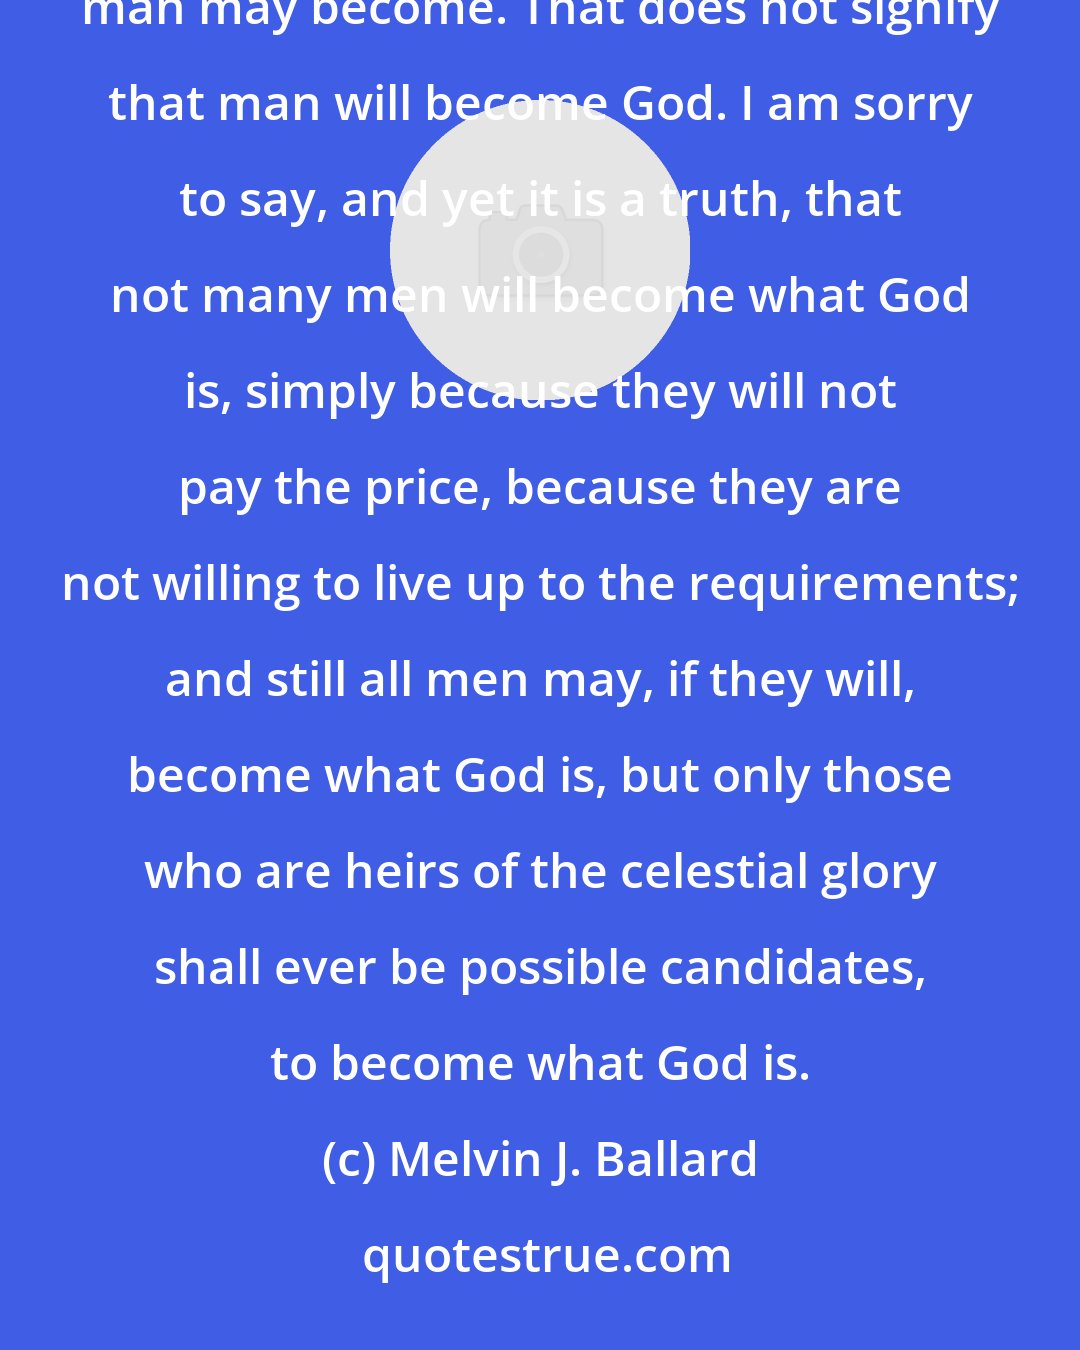 Melvin J. Ballard: It is a Mormon truism that is current among us and we all accept it, that as man is God once was and as God is man may become. That does not signify that man will become God. I am sorry to say, and yet it is a truth, that not many men will become what God is, simply because they will not pay the price, because they are not willing to live up to the requirements; and still all men may, if they will, become what God is, but only those who are heirs of the celestial glory shall ever be possible candidates, to become what God is.